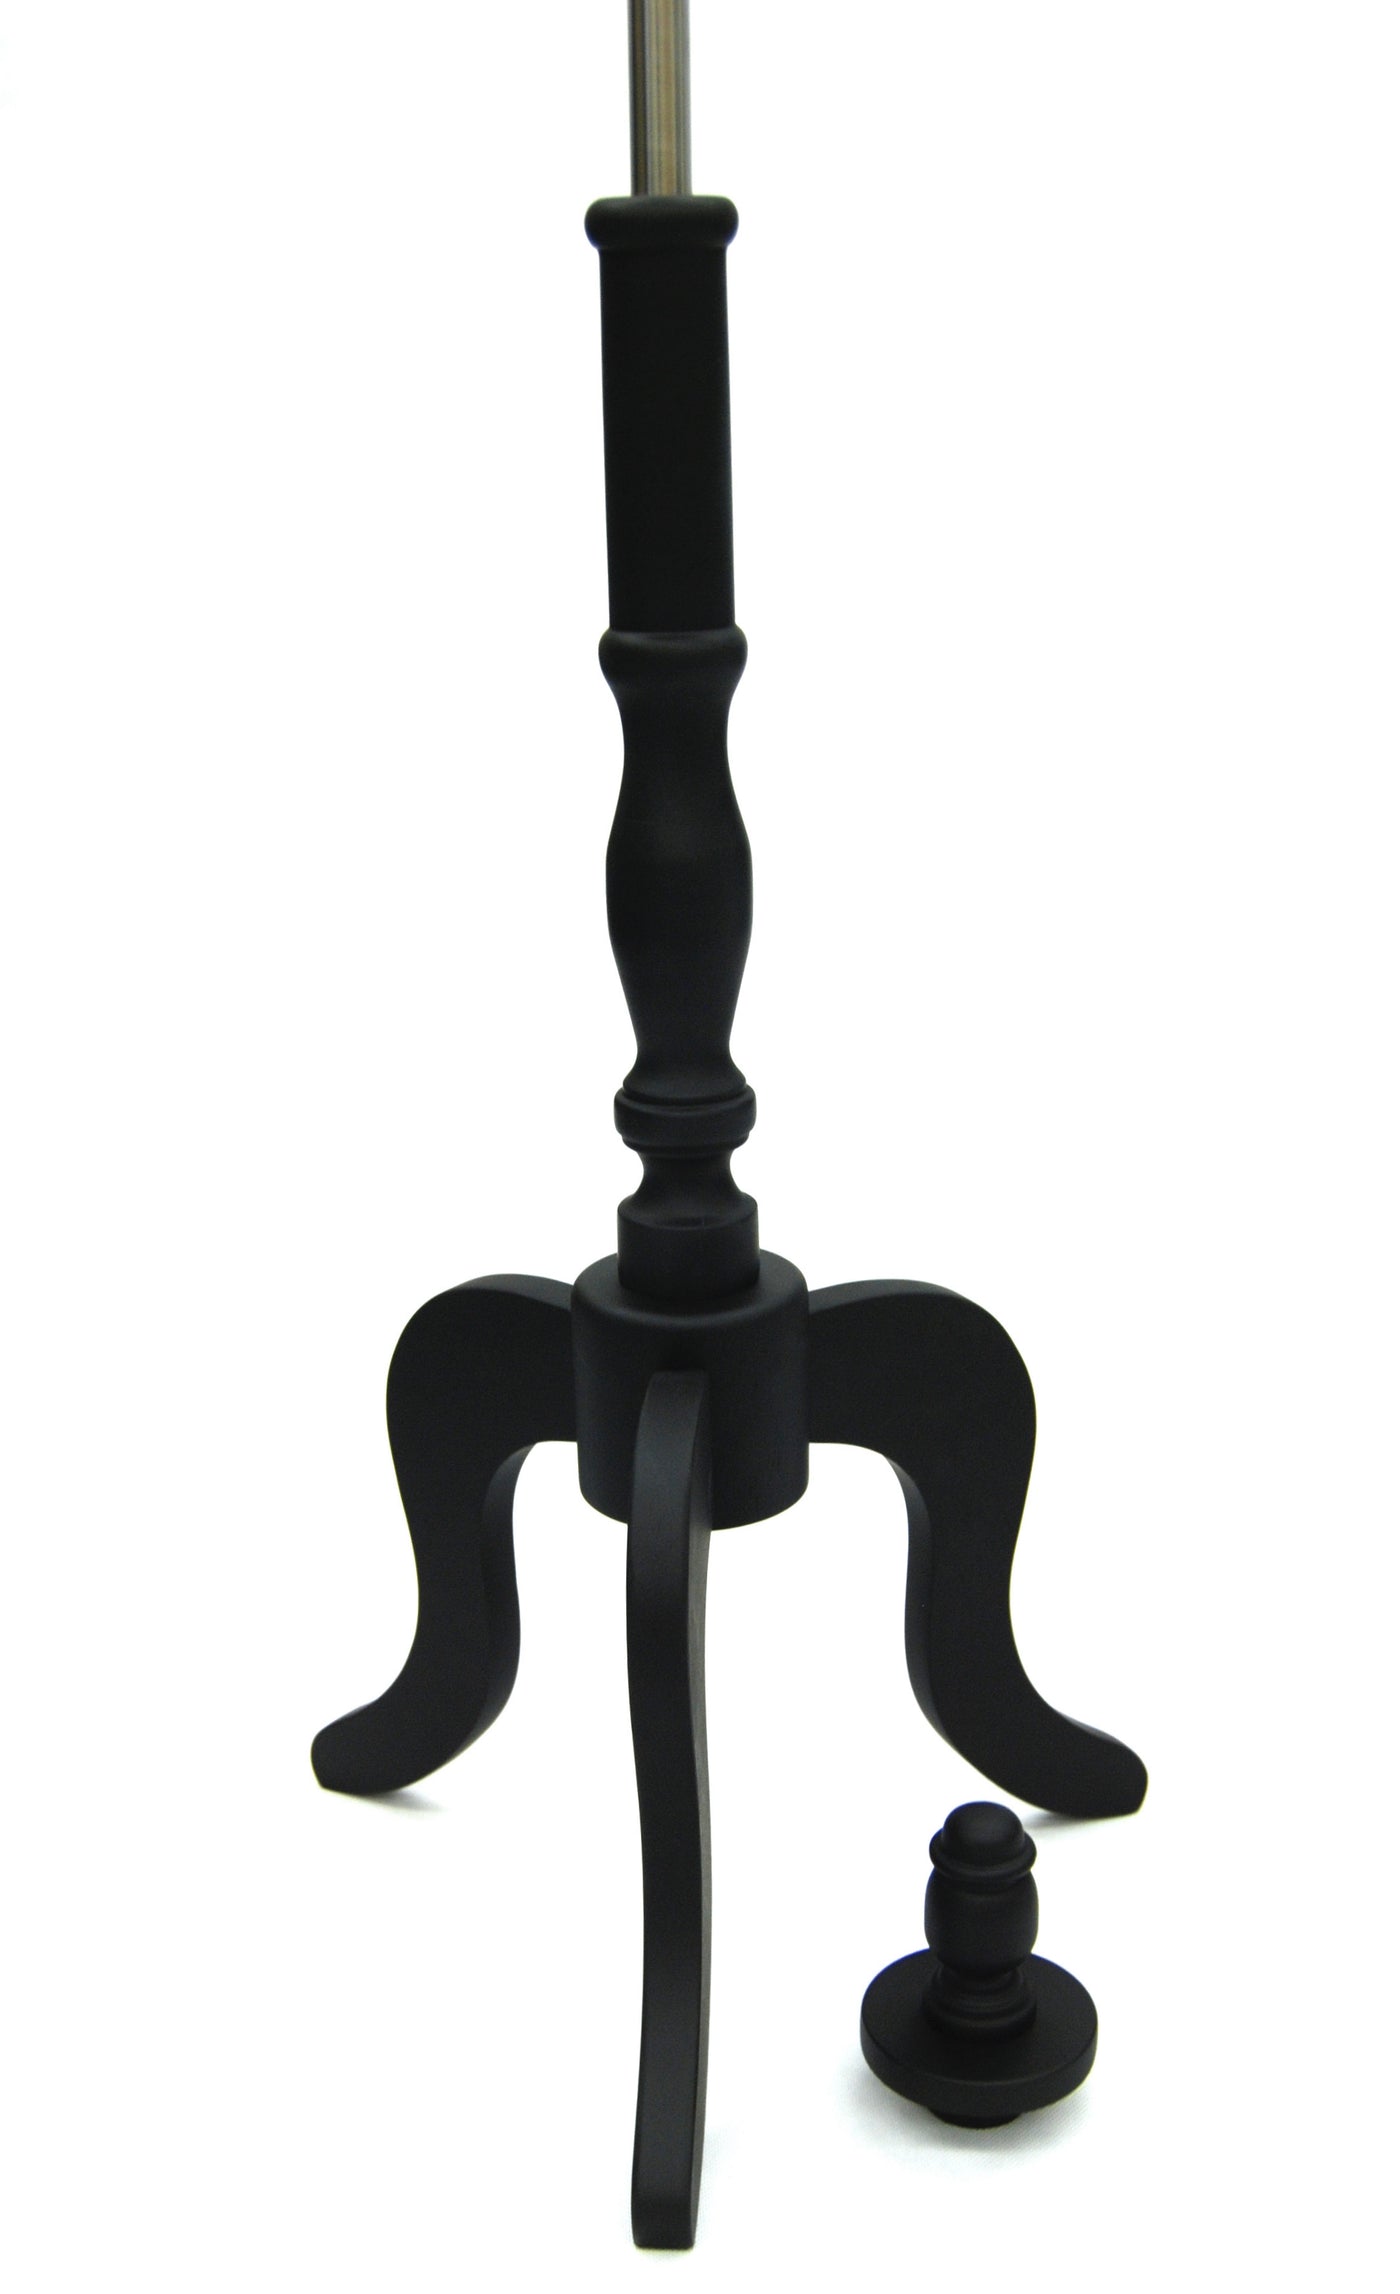 Antique Style Wooden Tripod Stand: Black